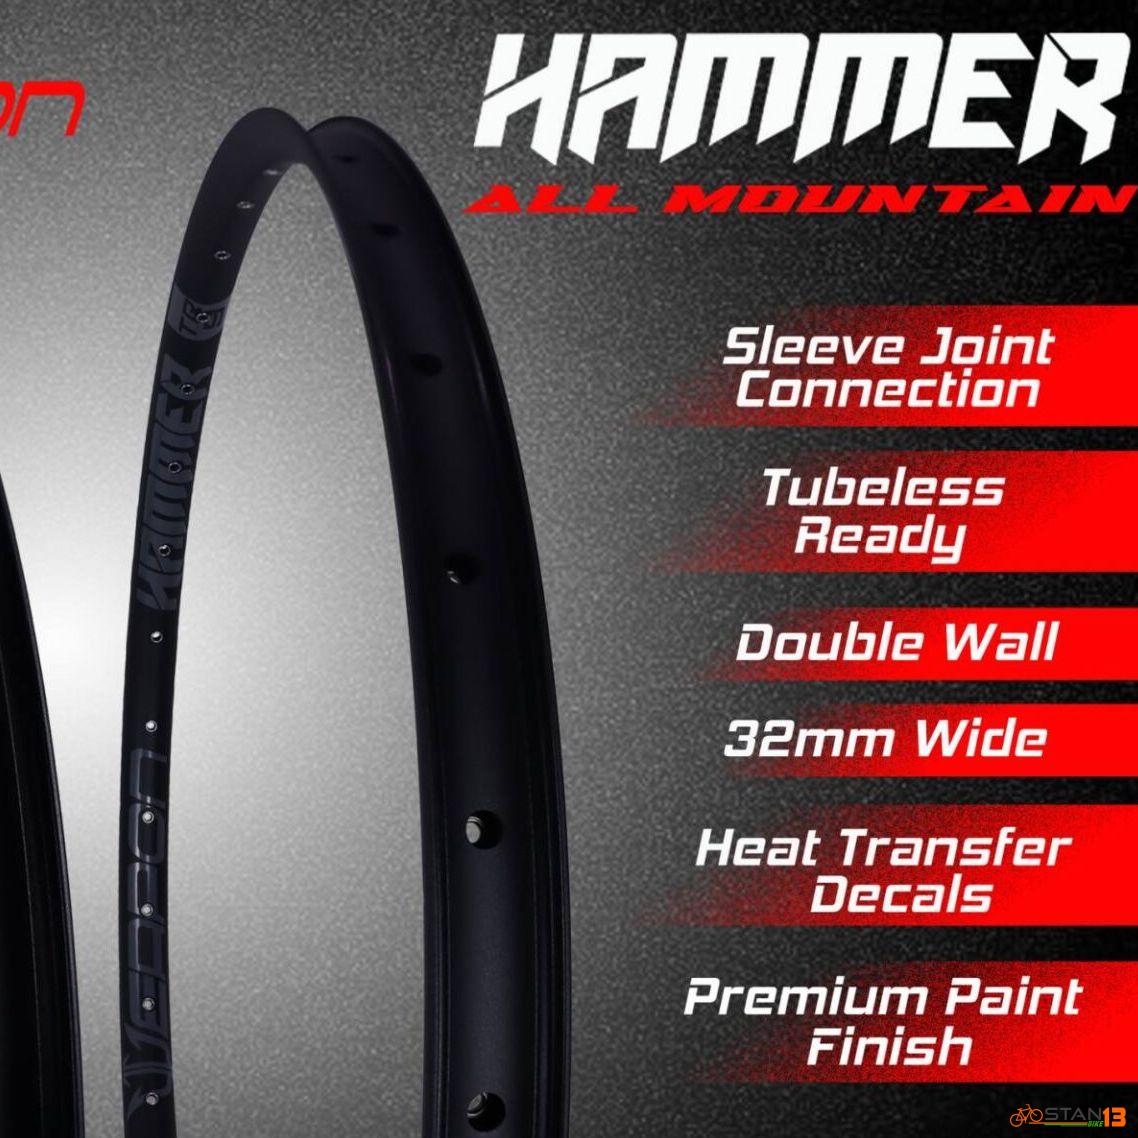 Rim Weapon Hammer TR7 for 27.5 and Hammer TR9 for 29er ALL MOUNTAIN ENDURO RIMS